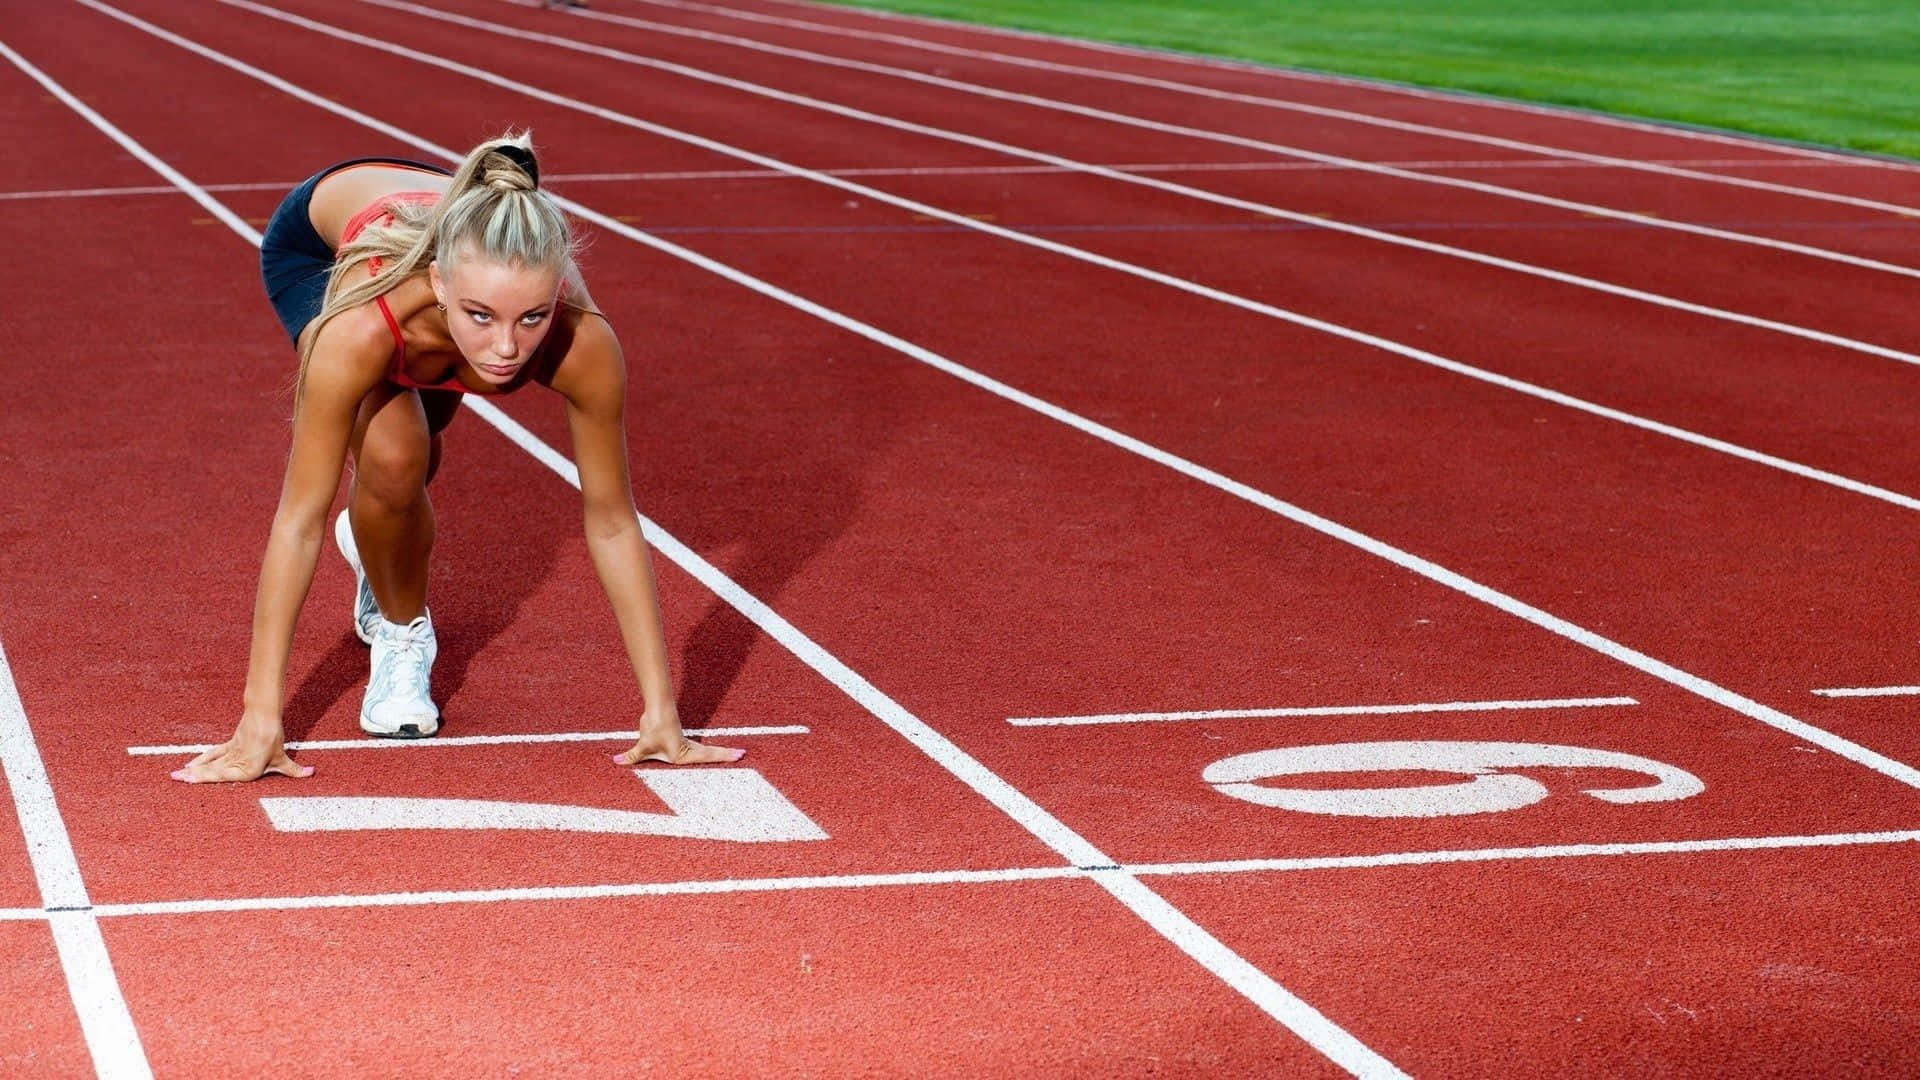 A Woman Is Preparing To Run On A Track Wallpaper